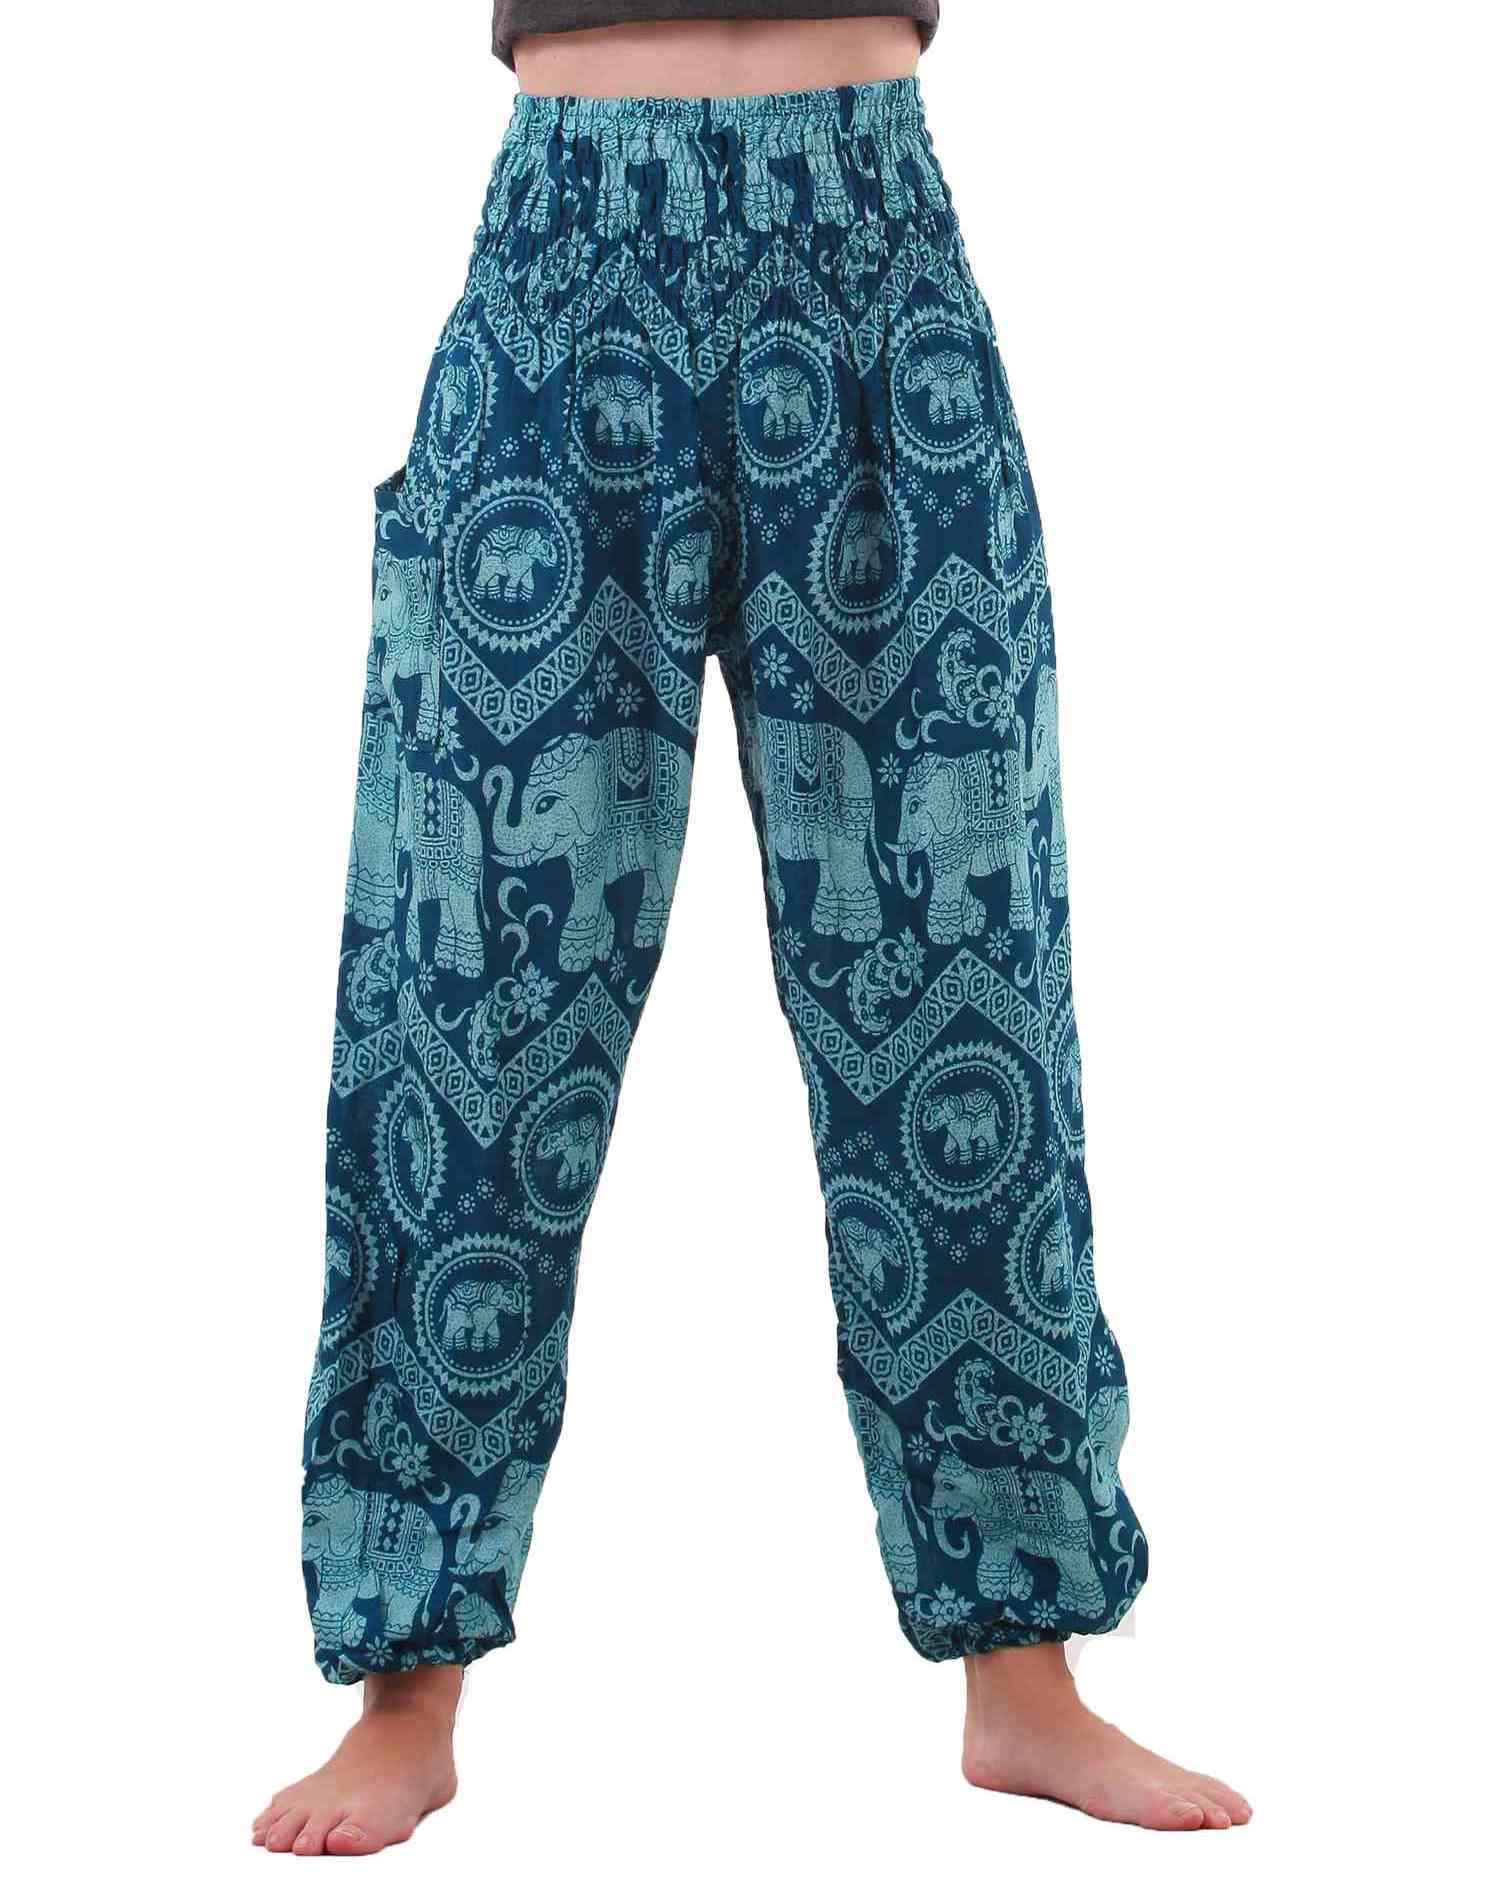 I Will Never Wear Elephant Pants | Xventures